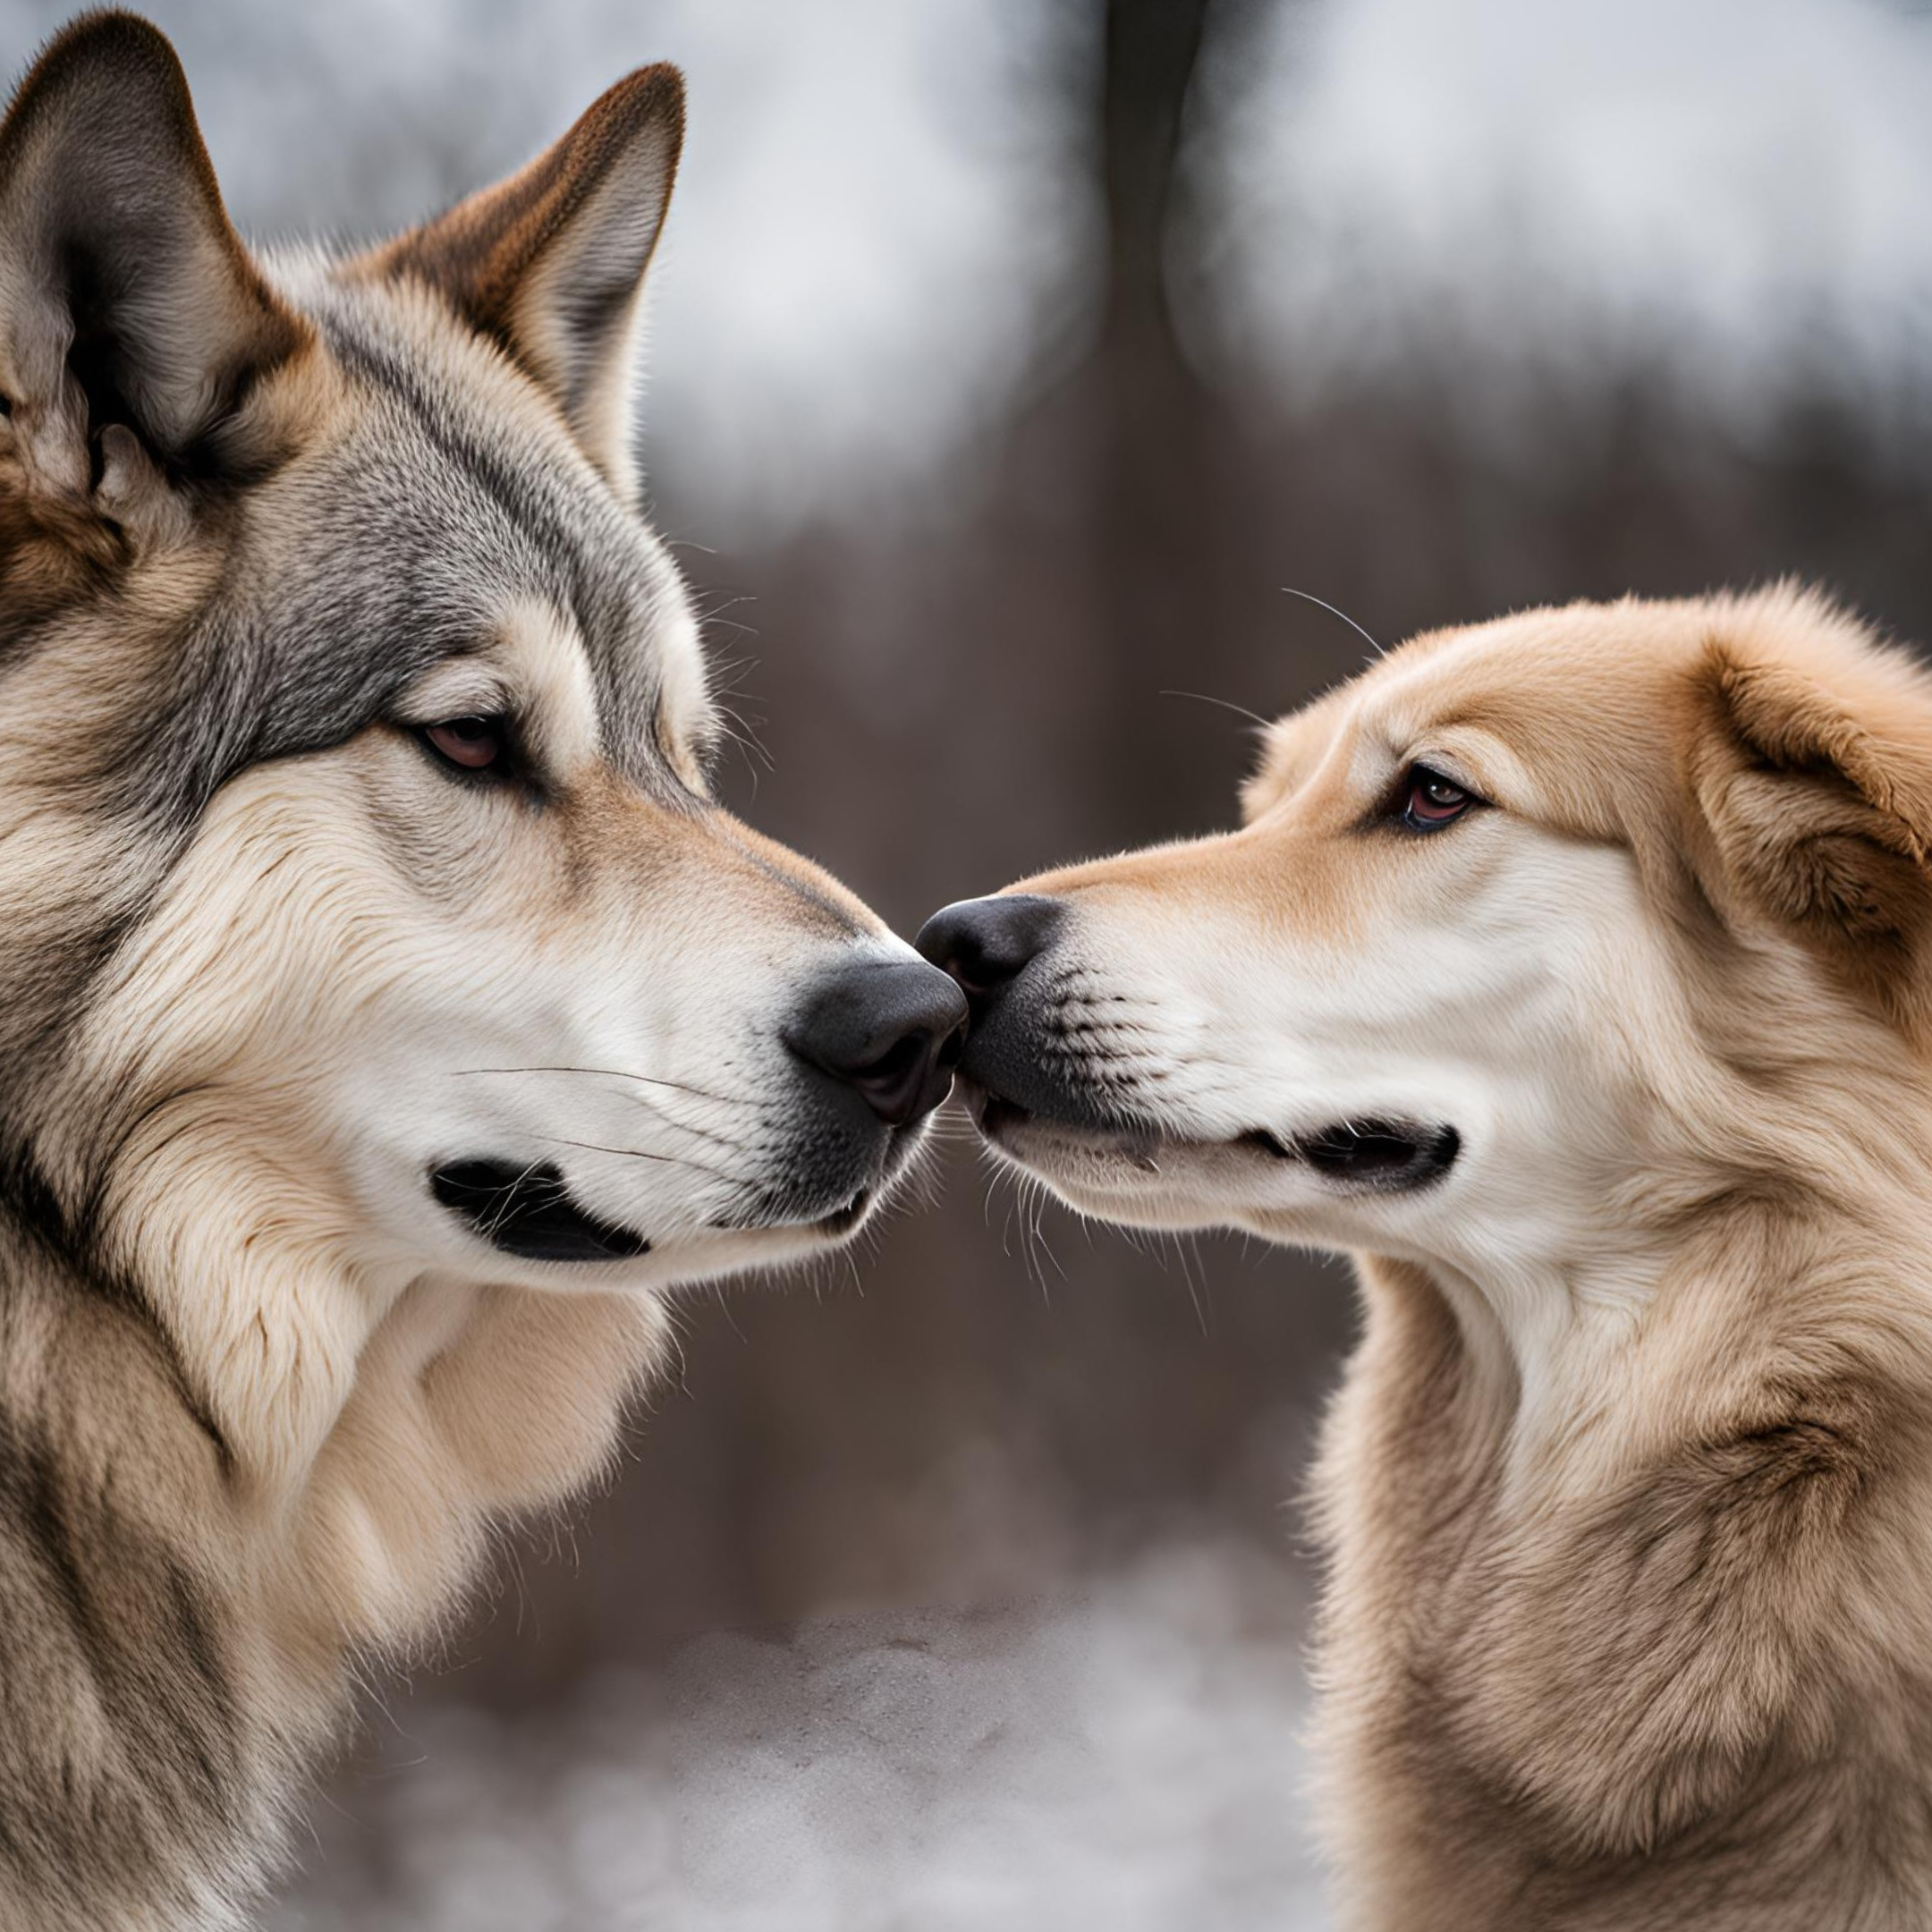 This picture is an AI-generated image of a dog and a wolf with their noses touching.